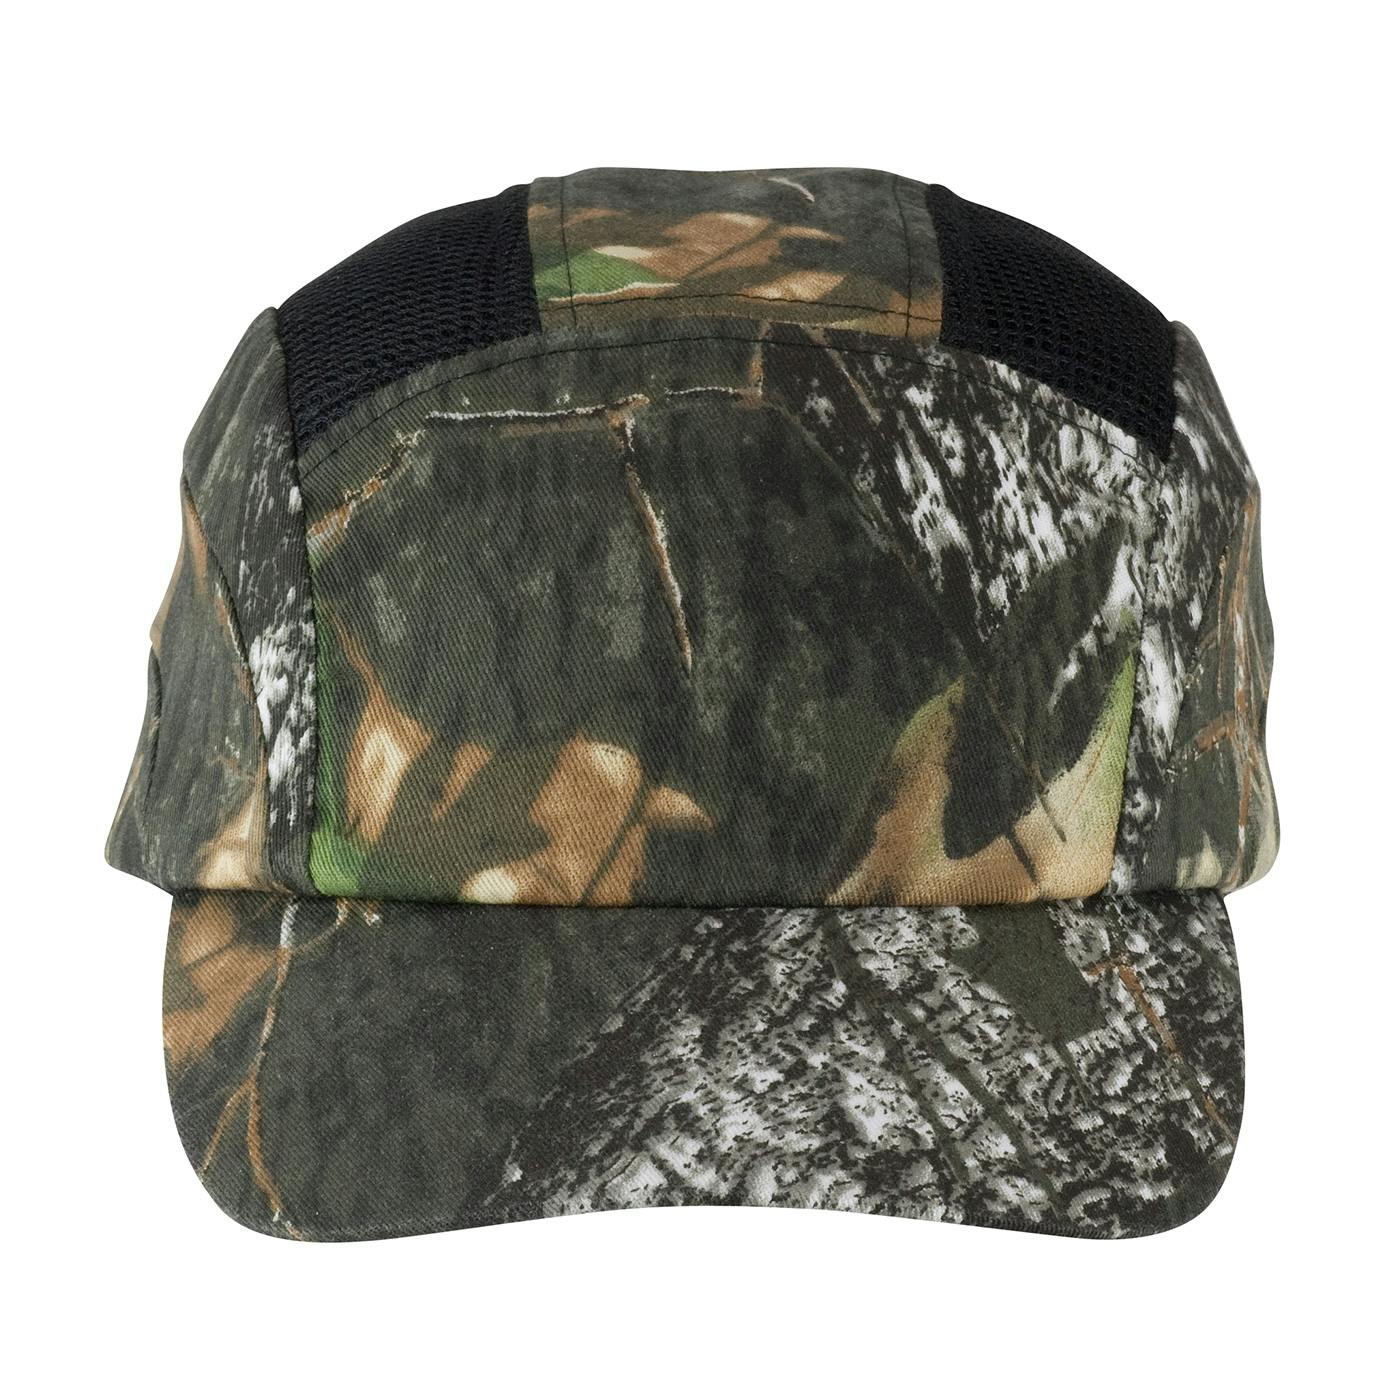 Camouflage Baseball Style Bump Cap with HDPE Protective Liner and Adjustable Back, Camouflage (282-ABR170-CAMO) - OS_0